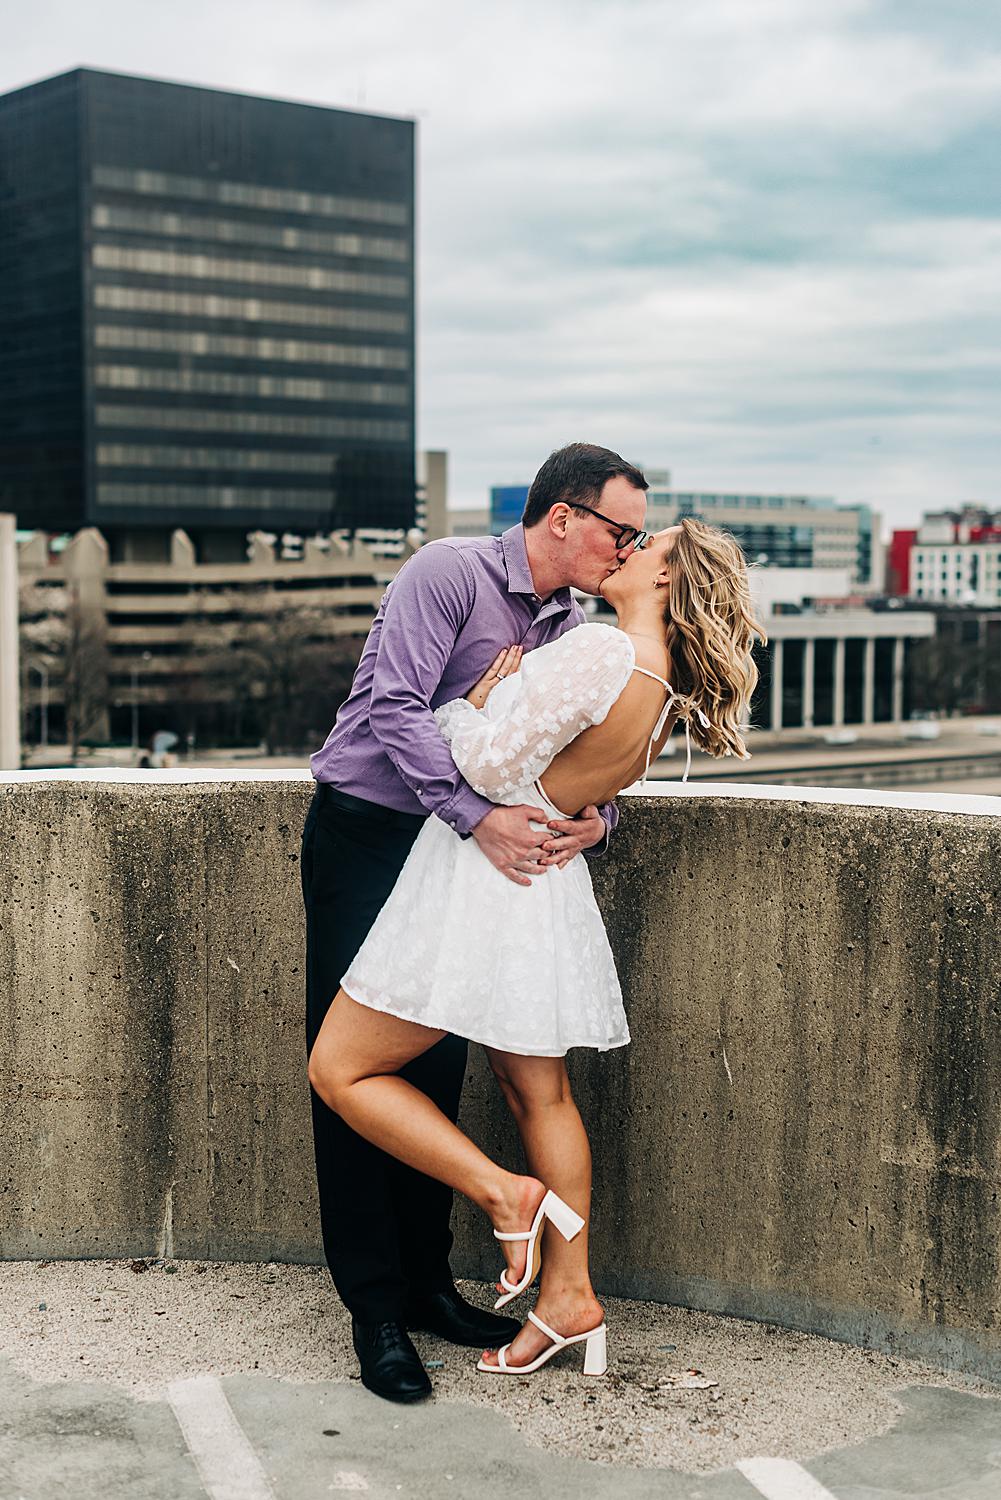 Newly engaged couple embrace in a kiss on top of a parking garage in Downtown Columbus